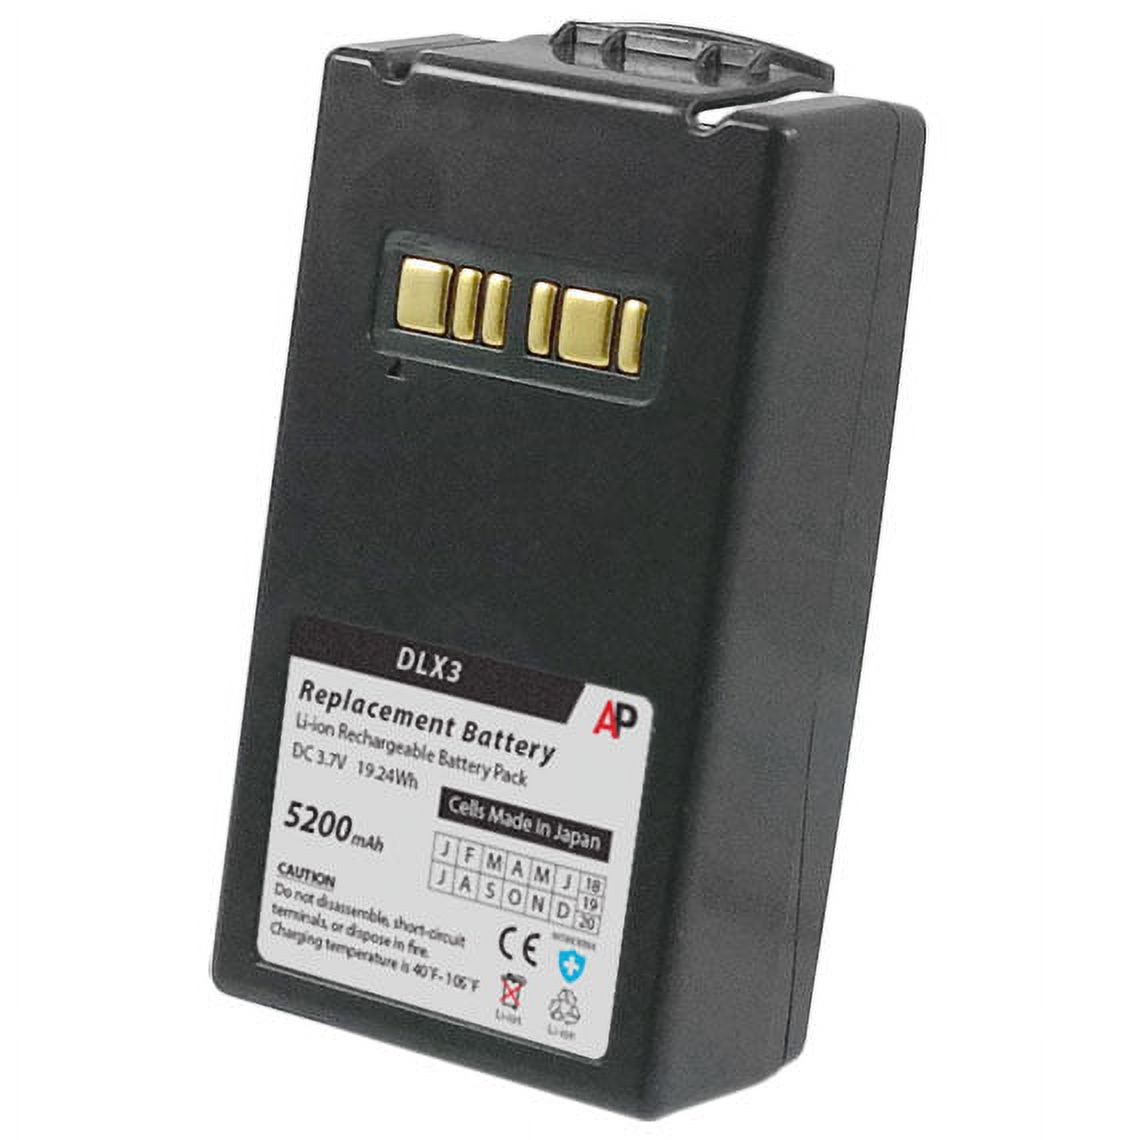 Replacement Battery for Datalogic Falcon X3 Scanners. 5200 mAh - image 1 of 3